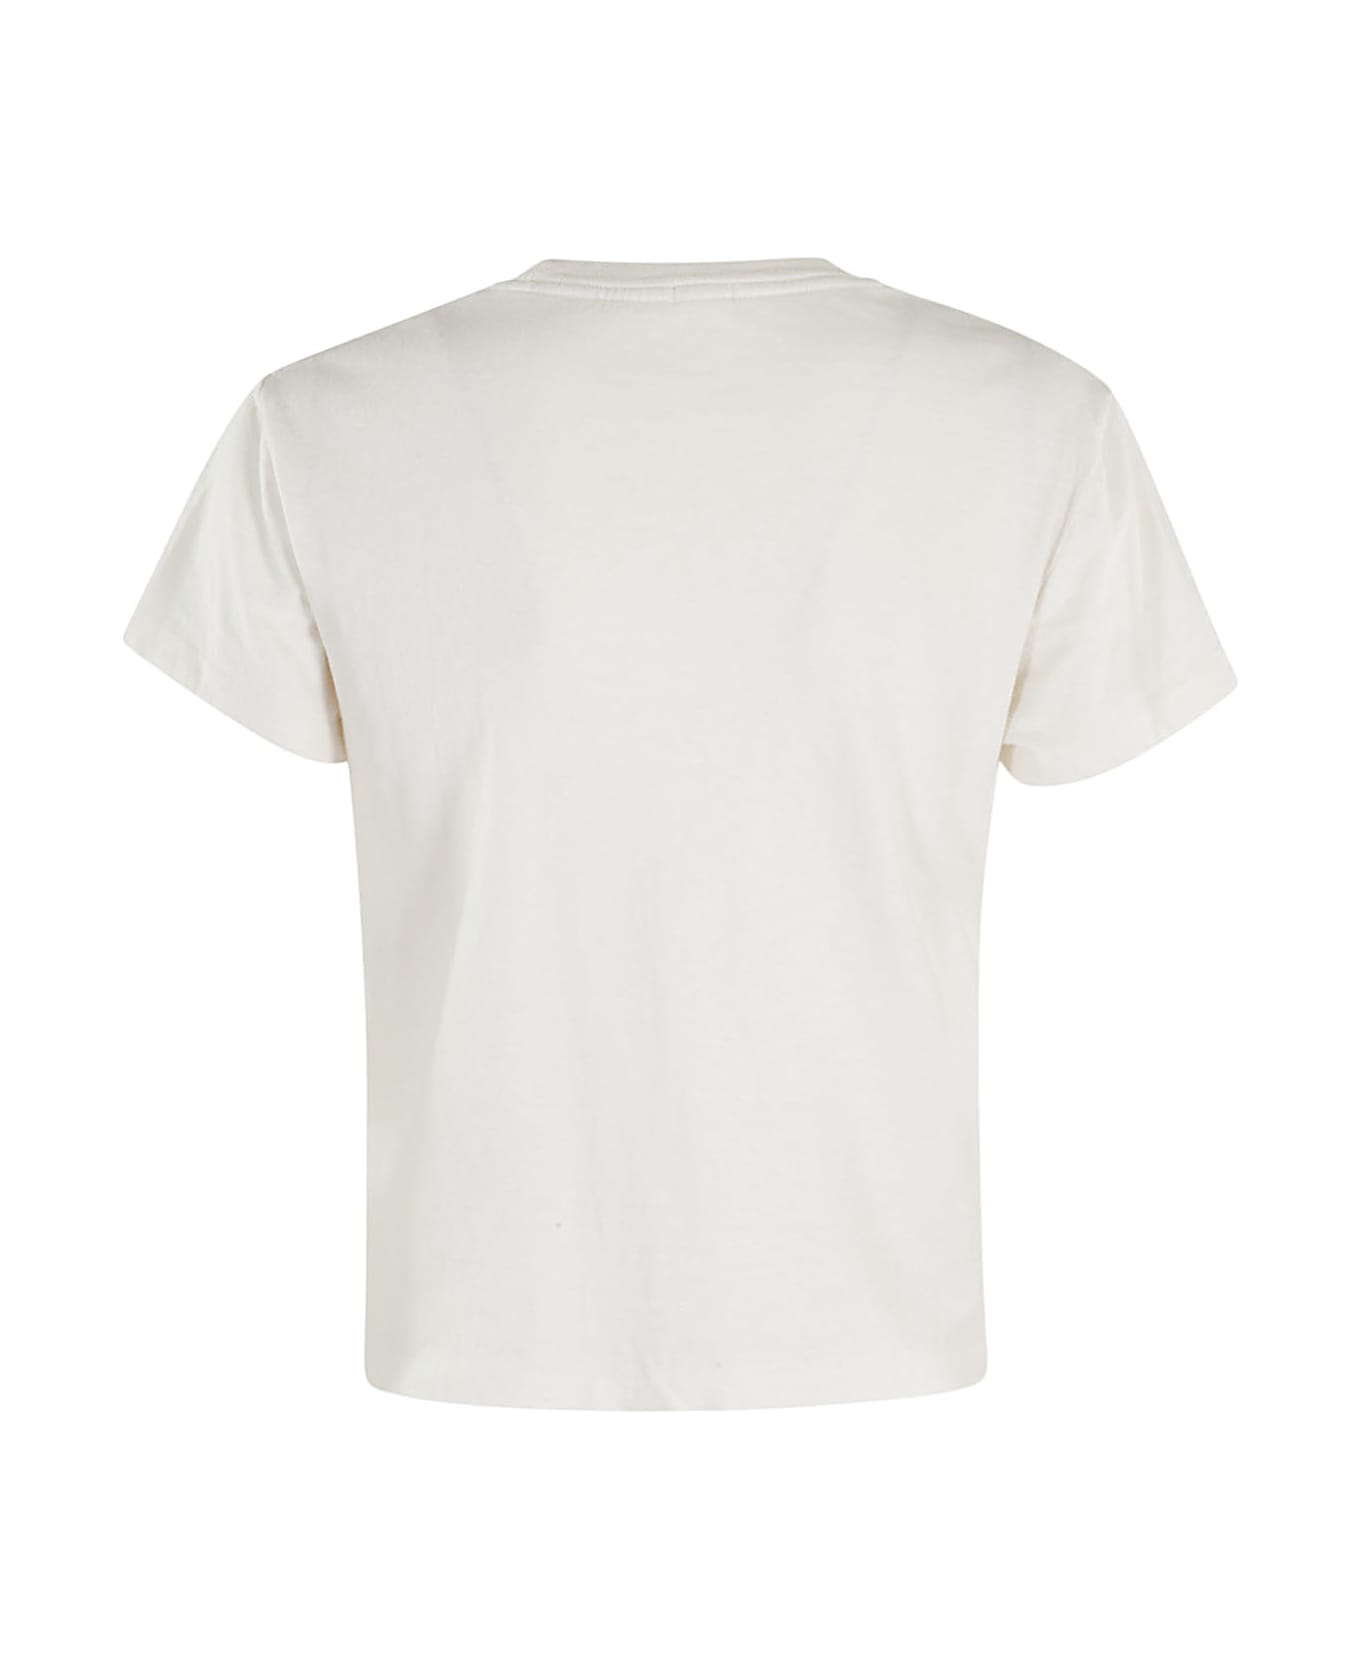 RE/DONE Classic Tee Whats Happening - Vintage White Tシャツ